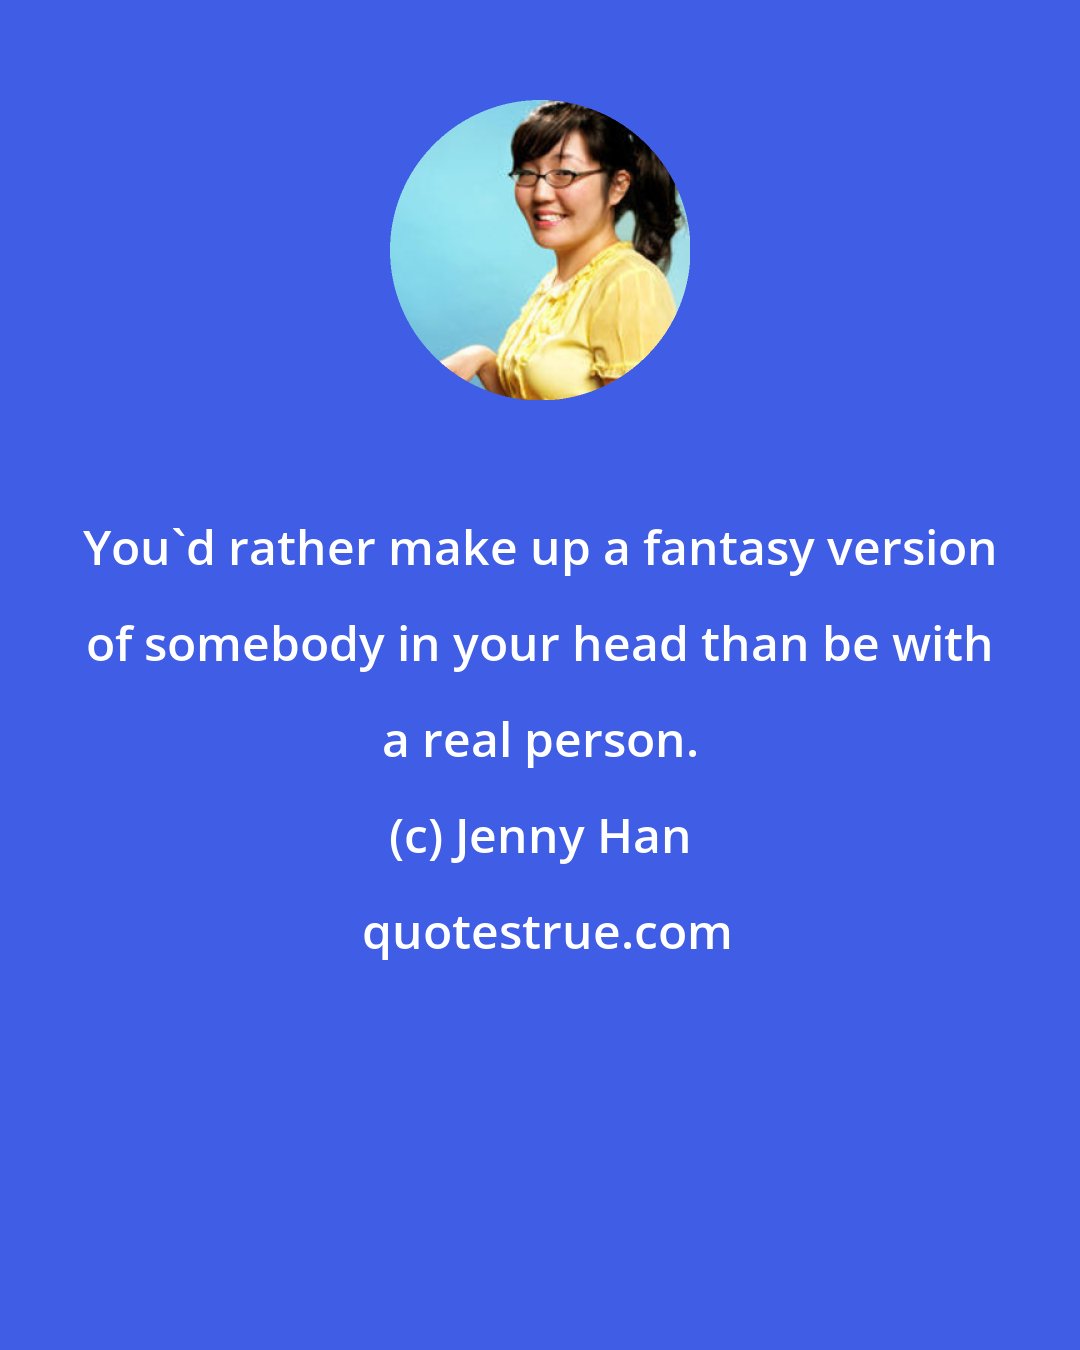 Jenny Han: You'd rather make up a fantasy version of somebody in your head than be with a real person.